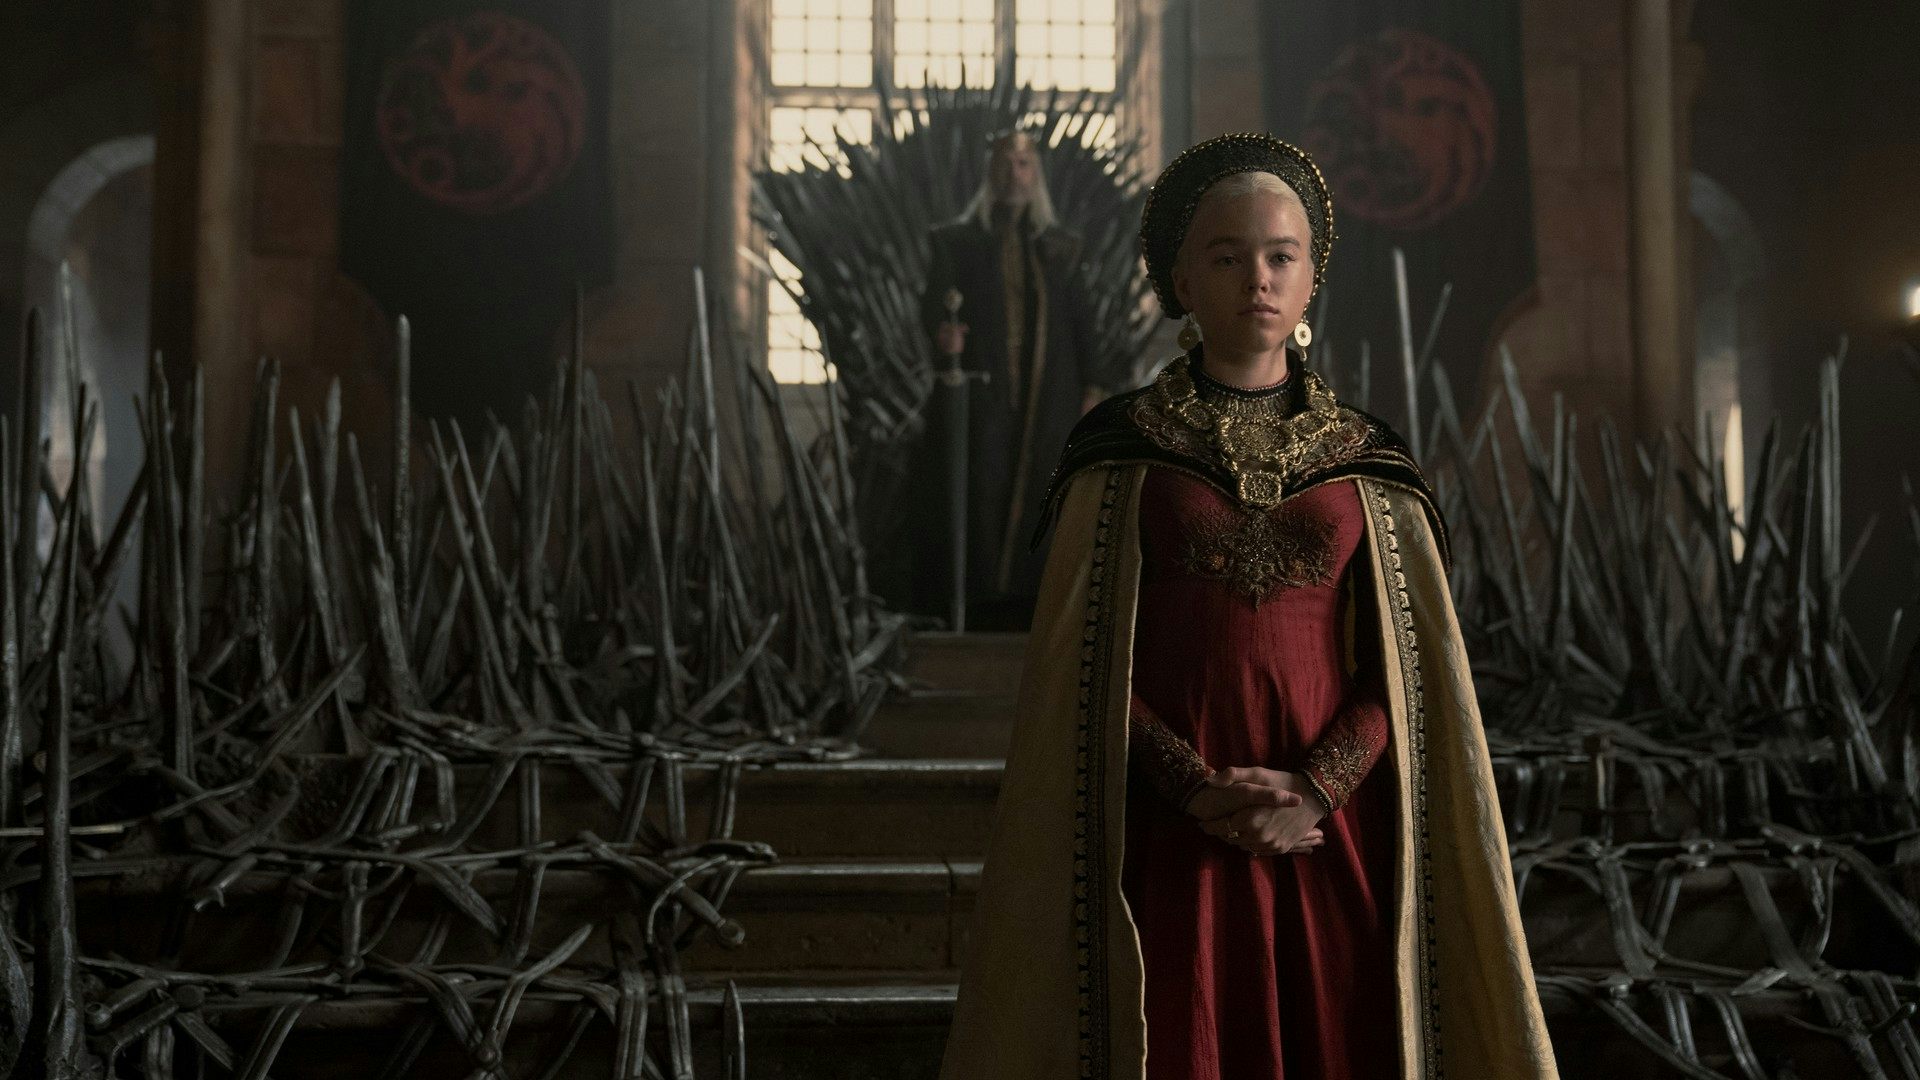 Hbo’s ‘House of the Dragon’ Was Inspired by a Real Medieval Dynastic Struggle Over a Female Ruler